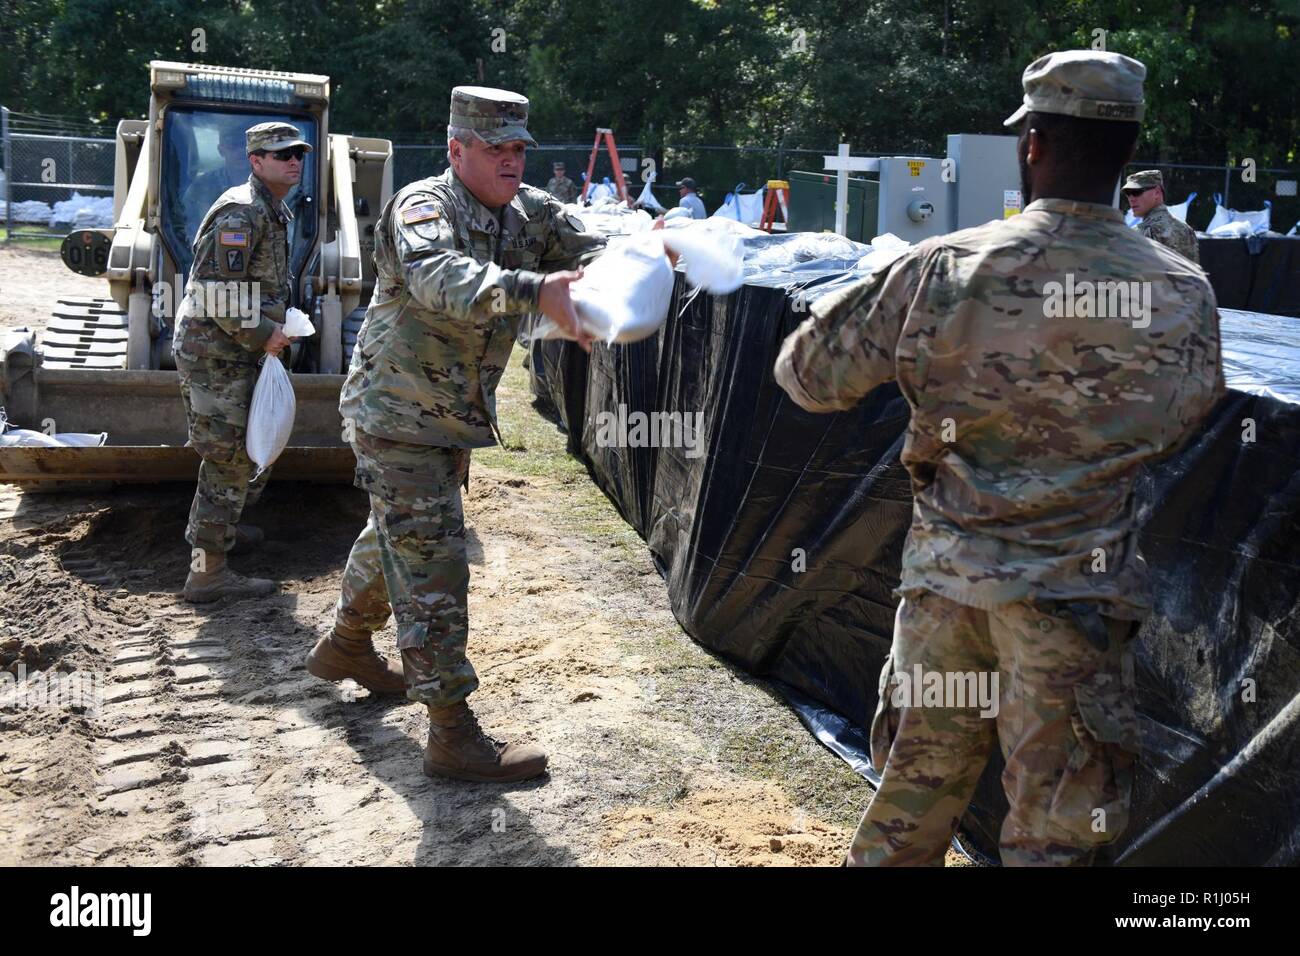 Mixed units of South Carolina National Guard Engineers and Transportation Corps are working round the clock to build flood water abatement barriers to protect the raw water pumping plant in Pawleys Island, S.C., Sept. 24, 2018. Brig. Gen. Jeff Jones, the SCNG Assistant Adjutant General for Army arrives to show his appreciation for the hard work being done by SCNG Soldiers and to assist with the construction project. The purpose of this project is to protect the fresh water supply for surrounding areas as extensive flooding is anticipated from the aftermath of Hurricane Florence last week. The  Stock Photo